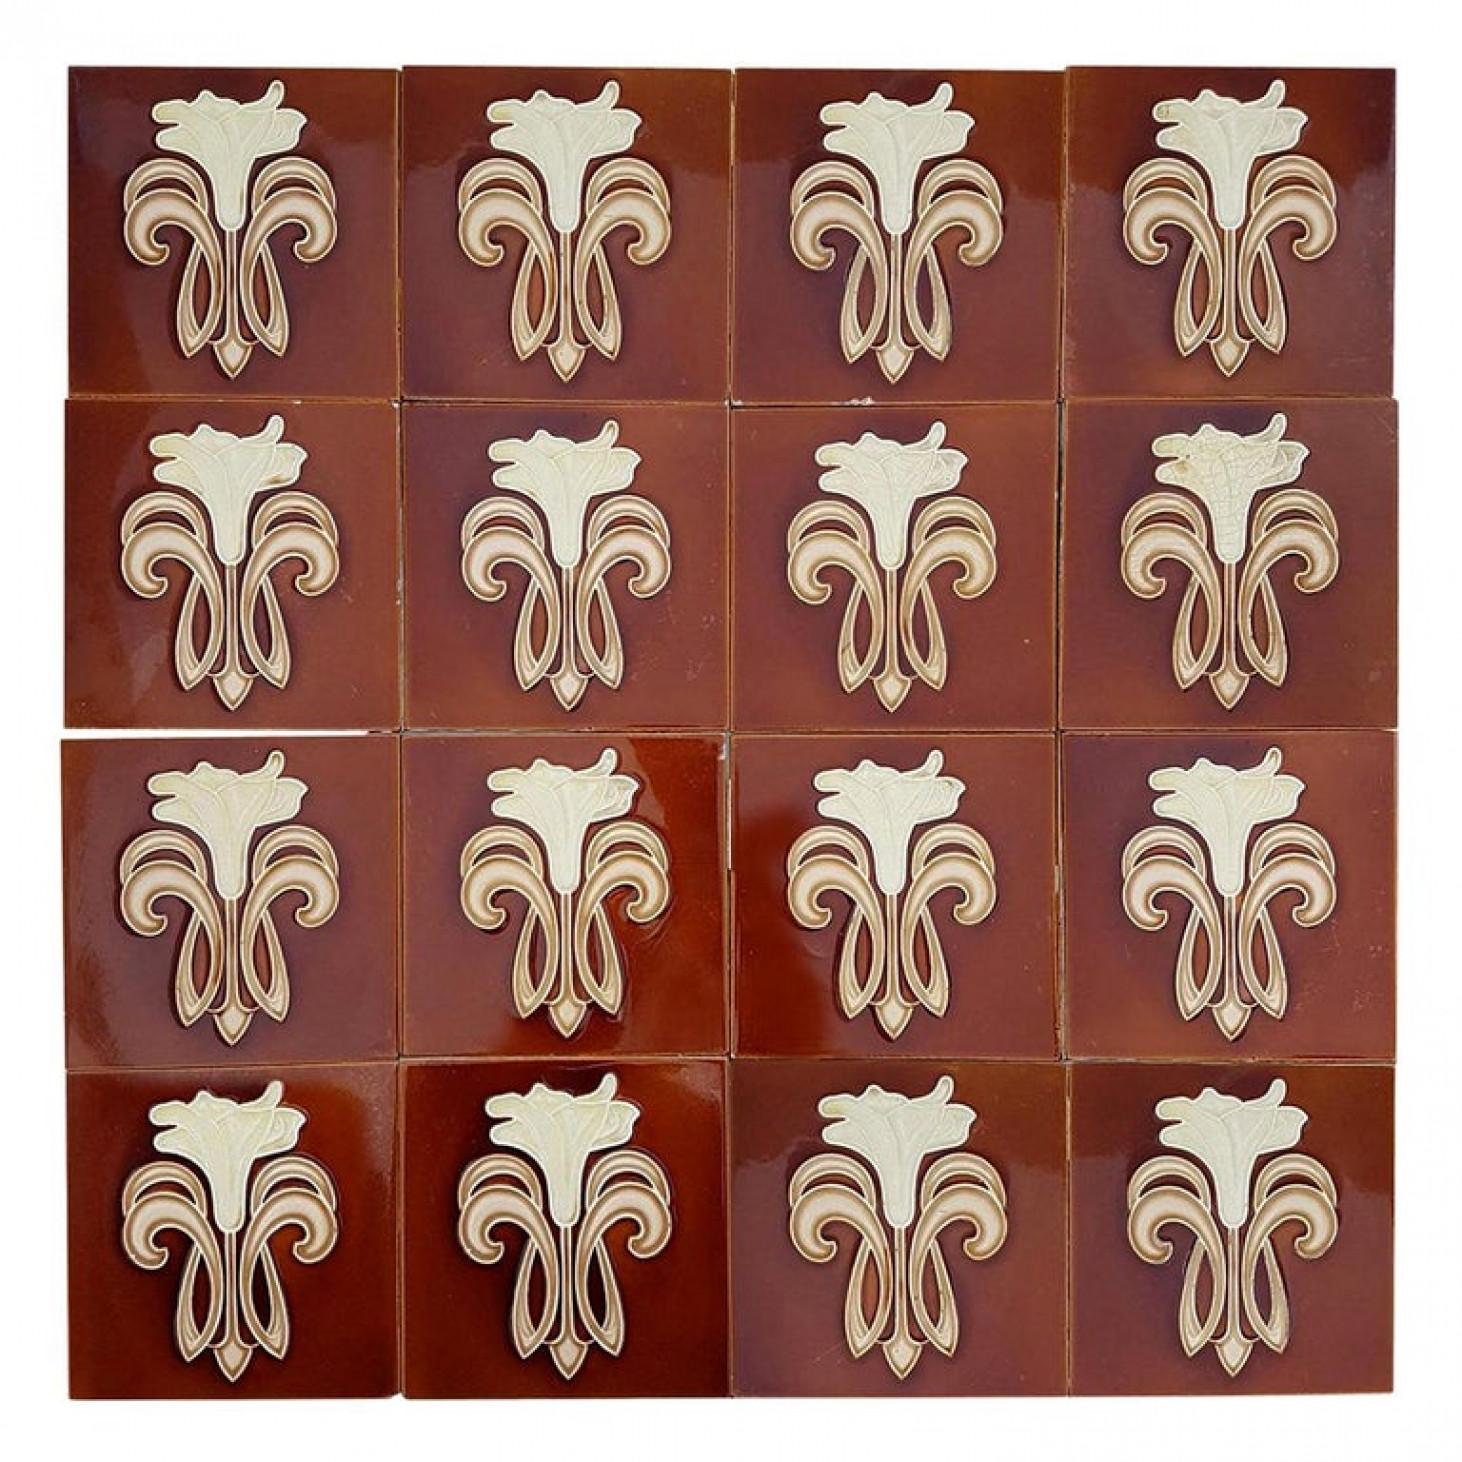 Recently lifted from its original home, a set of antique tiles from the early 20th century. With a beautiful stylized design of a lily.
Manufactured by Gilliot Fabrieken te Hemiksem.

Size each tile: Inches 5.9 inches (15.1 cm) width x 5.9 inches